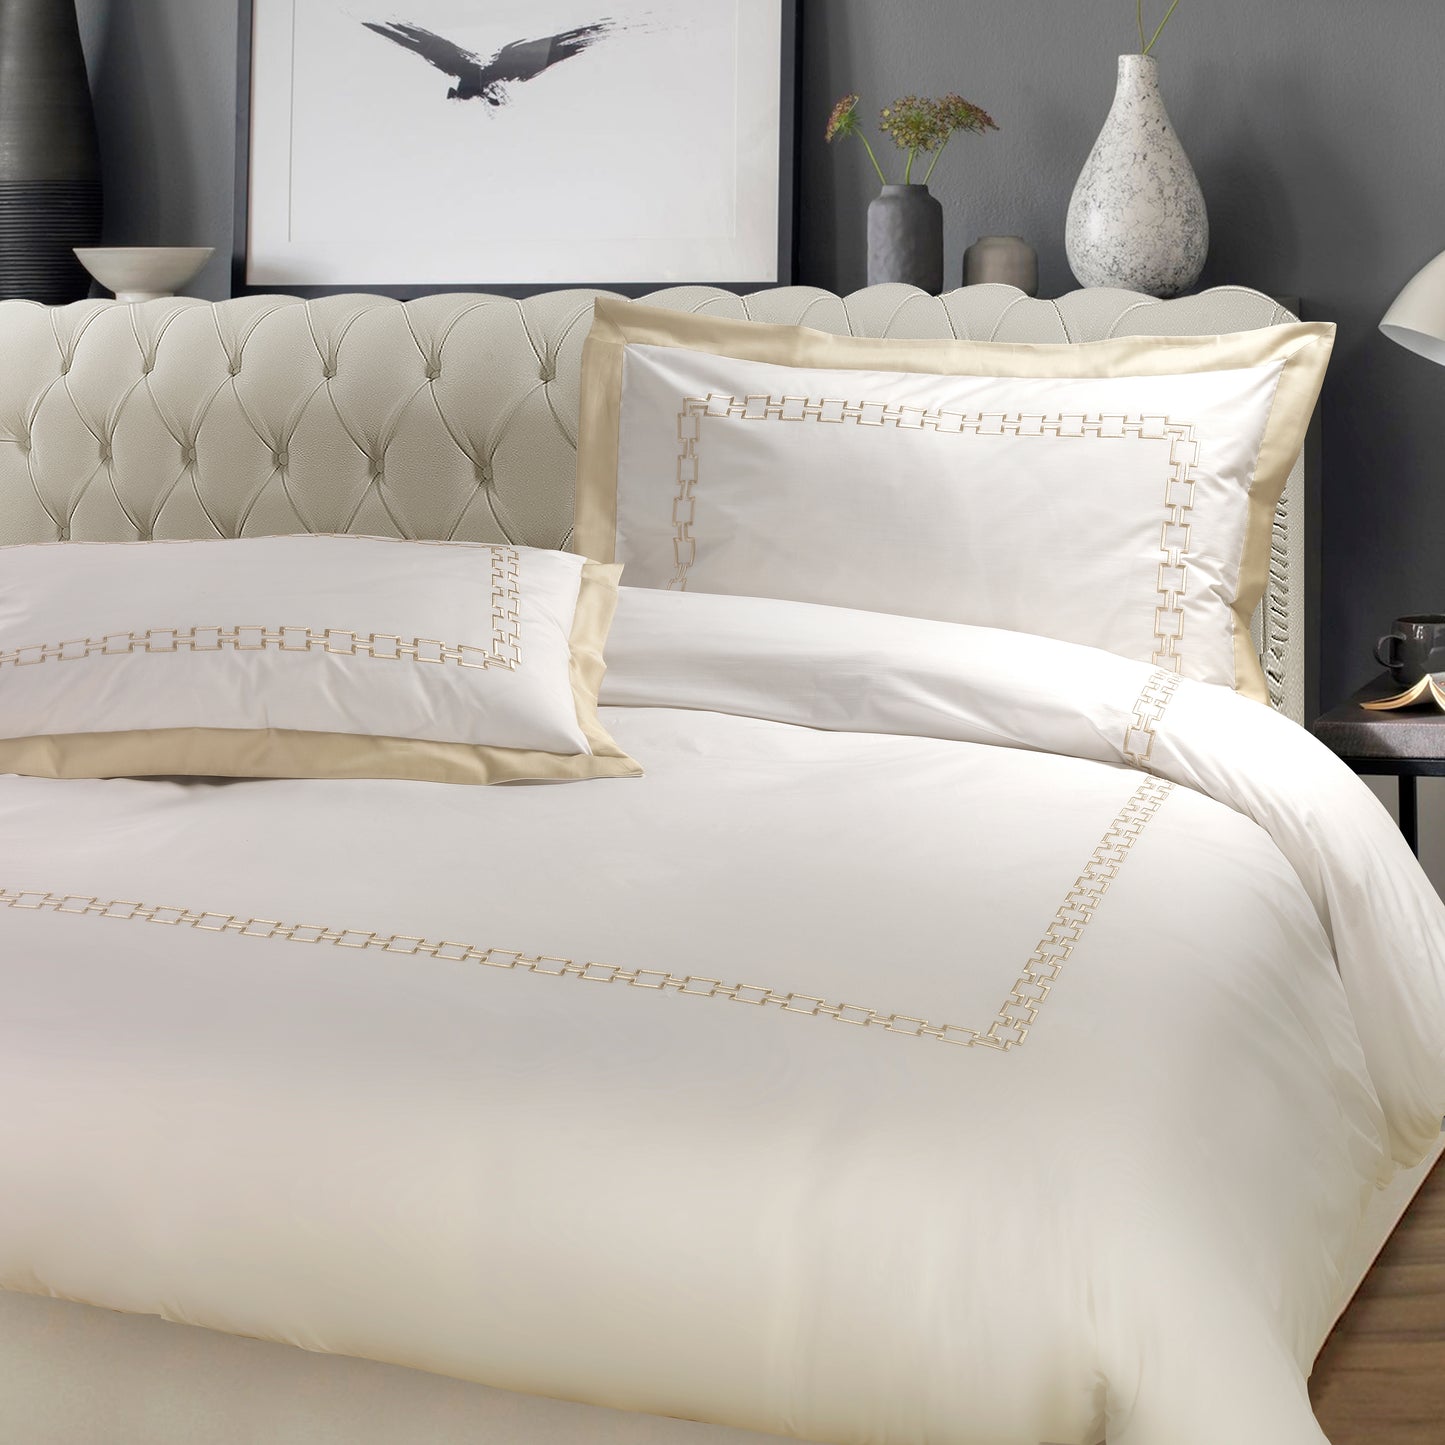 Duvet Cover Set in 400TC Cotton Percale with Hand-Embossed Greek Border - Medicea